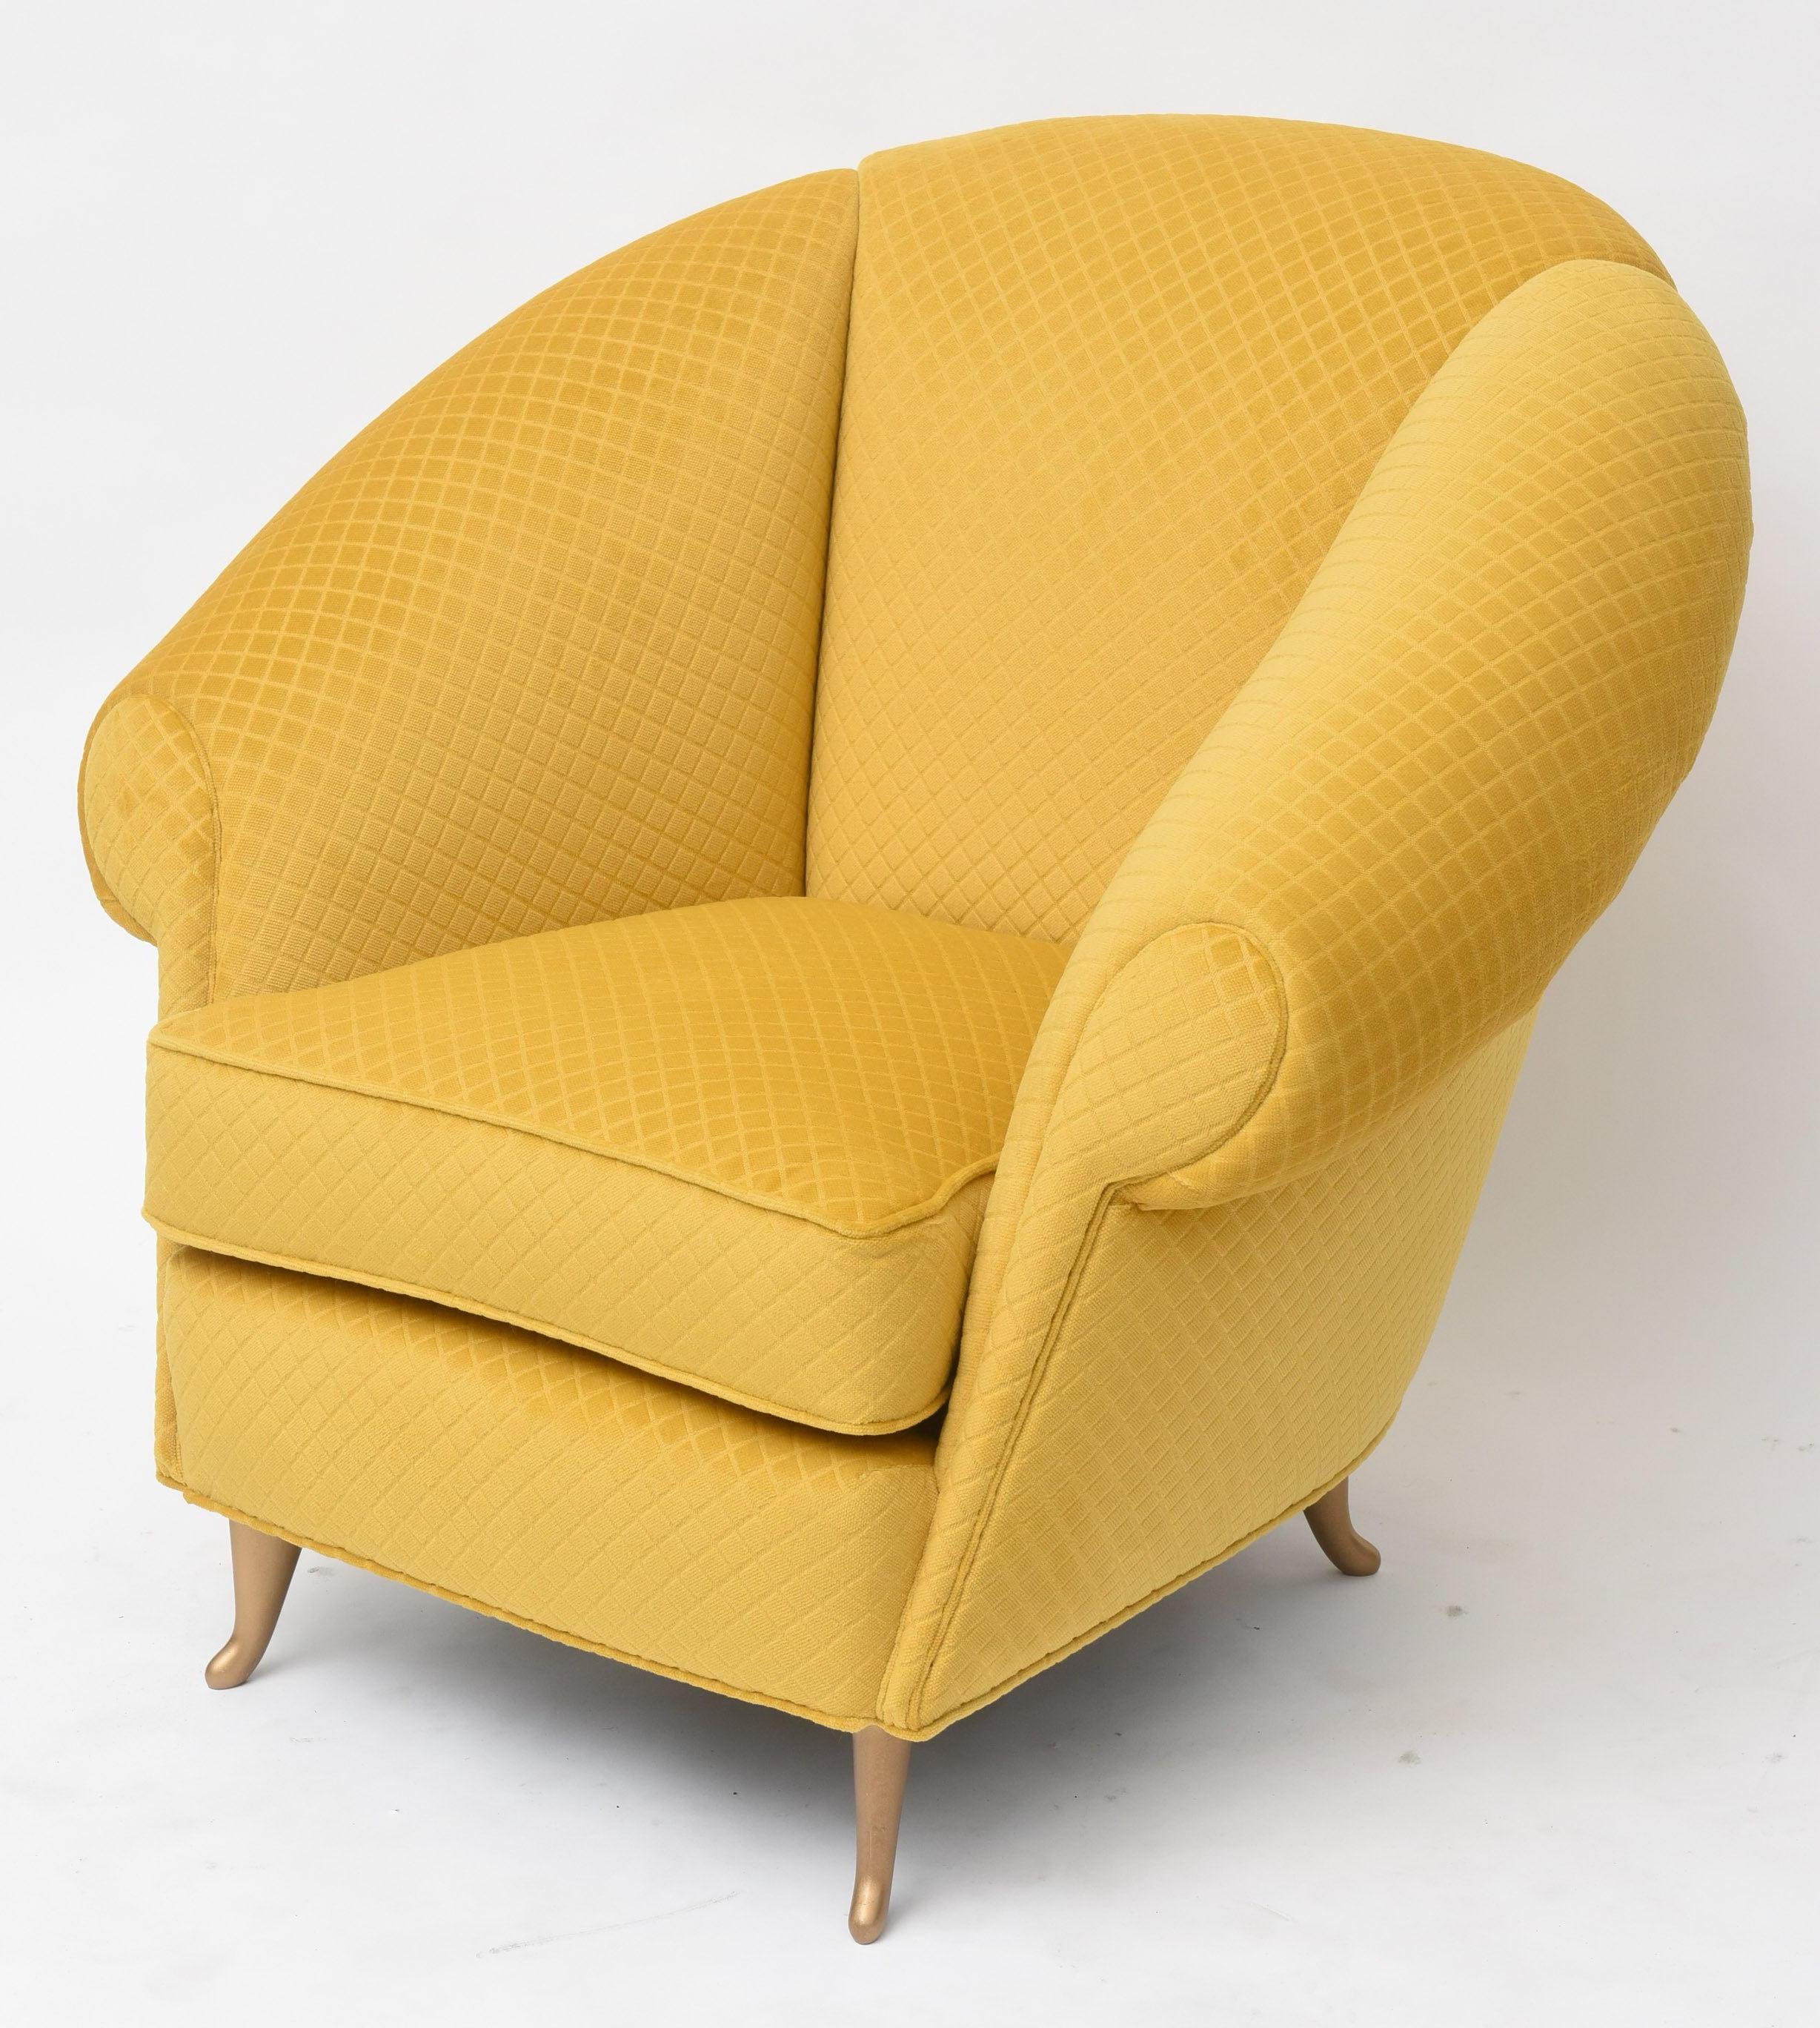 The rounded upholstered seat with rolled arms on brass curved legs, new upholstery.